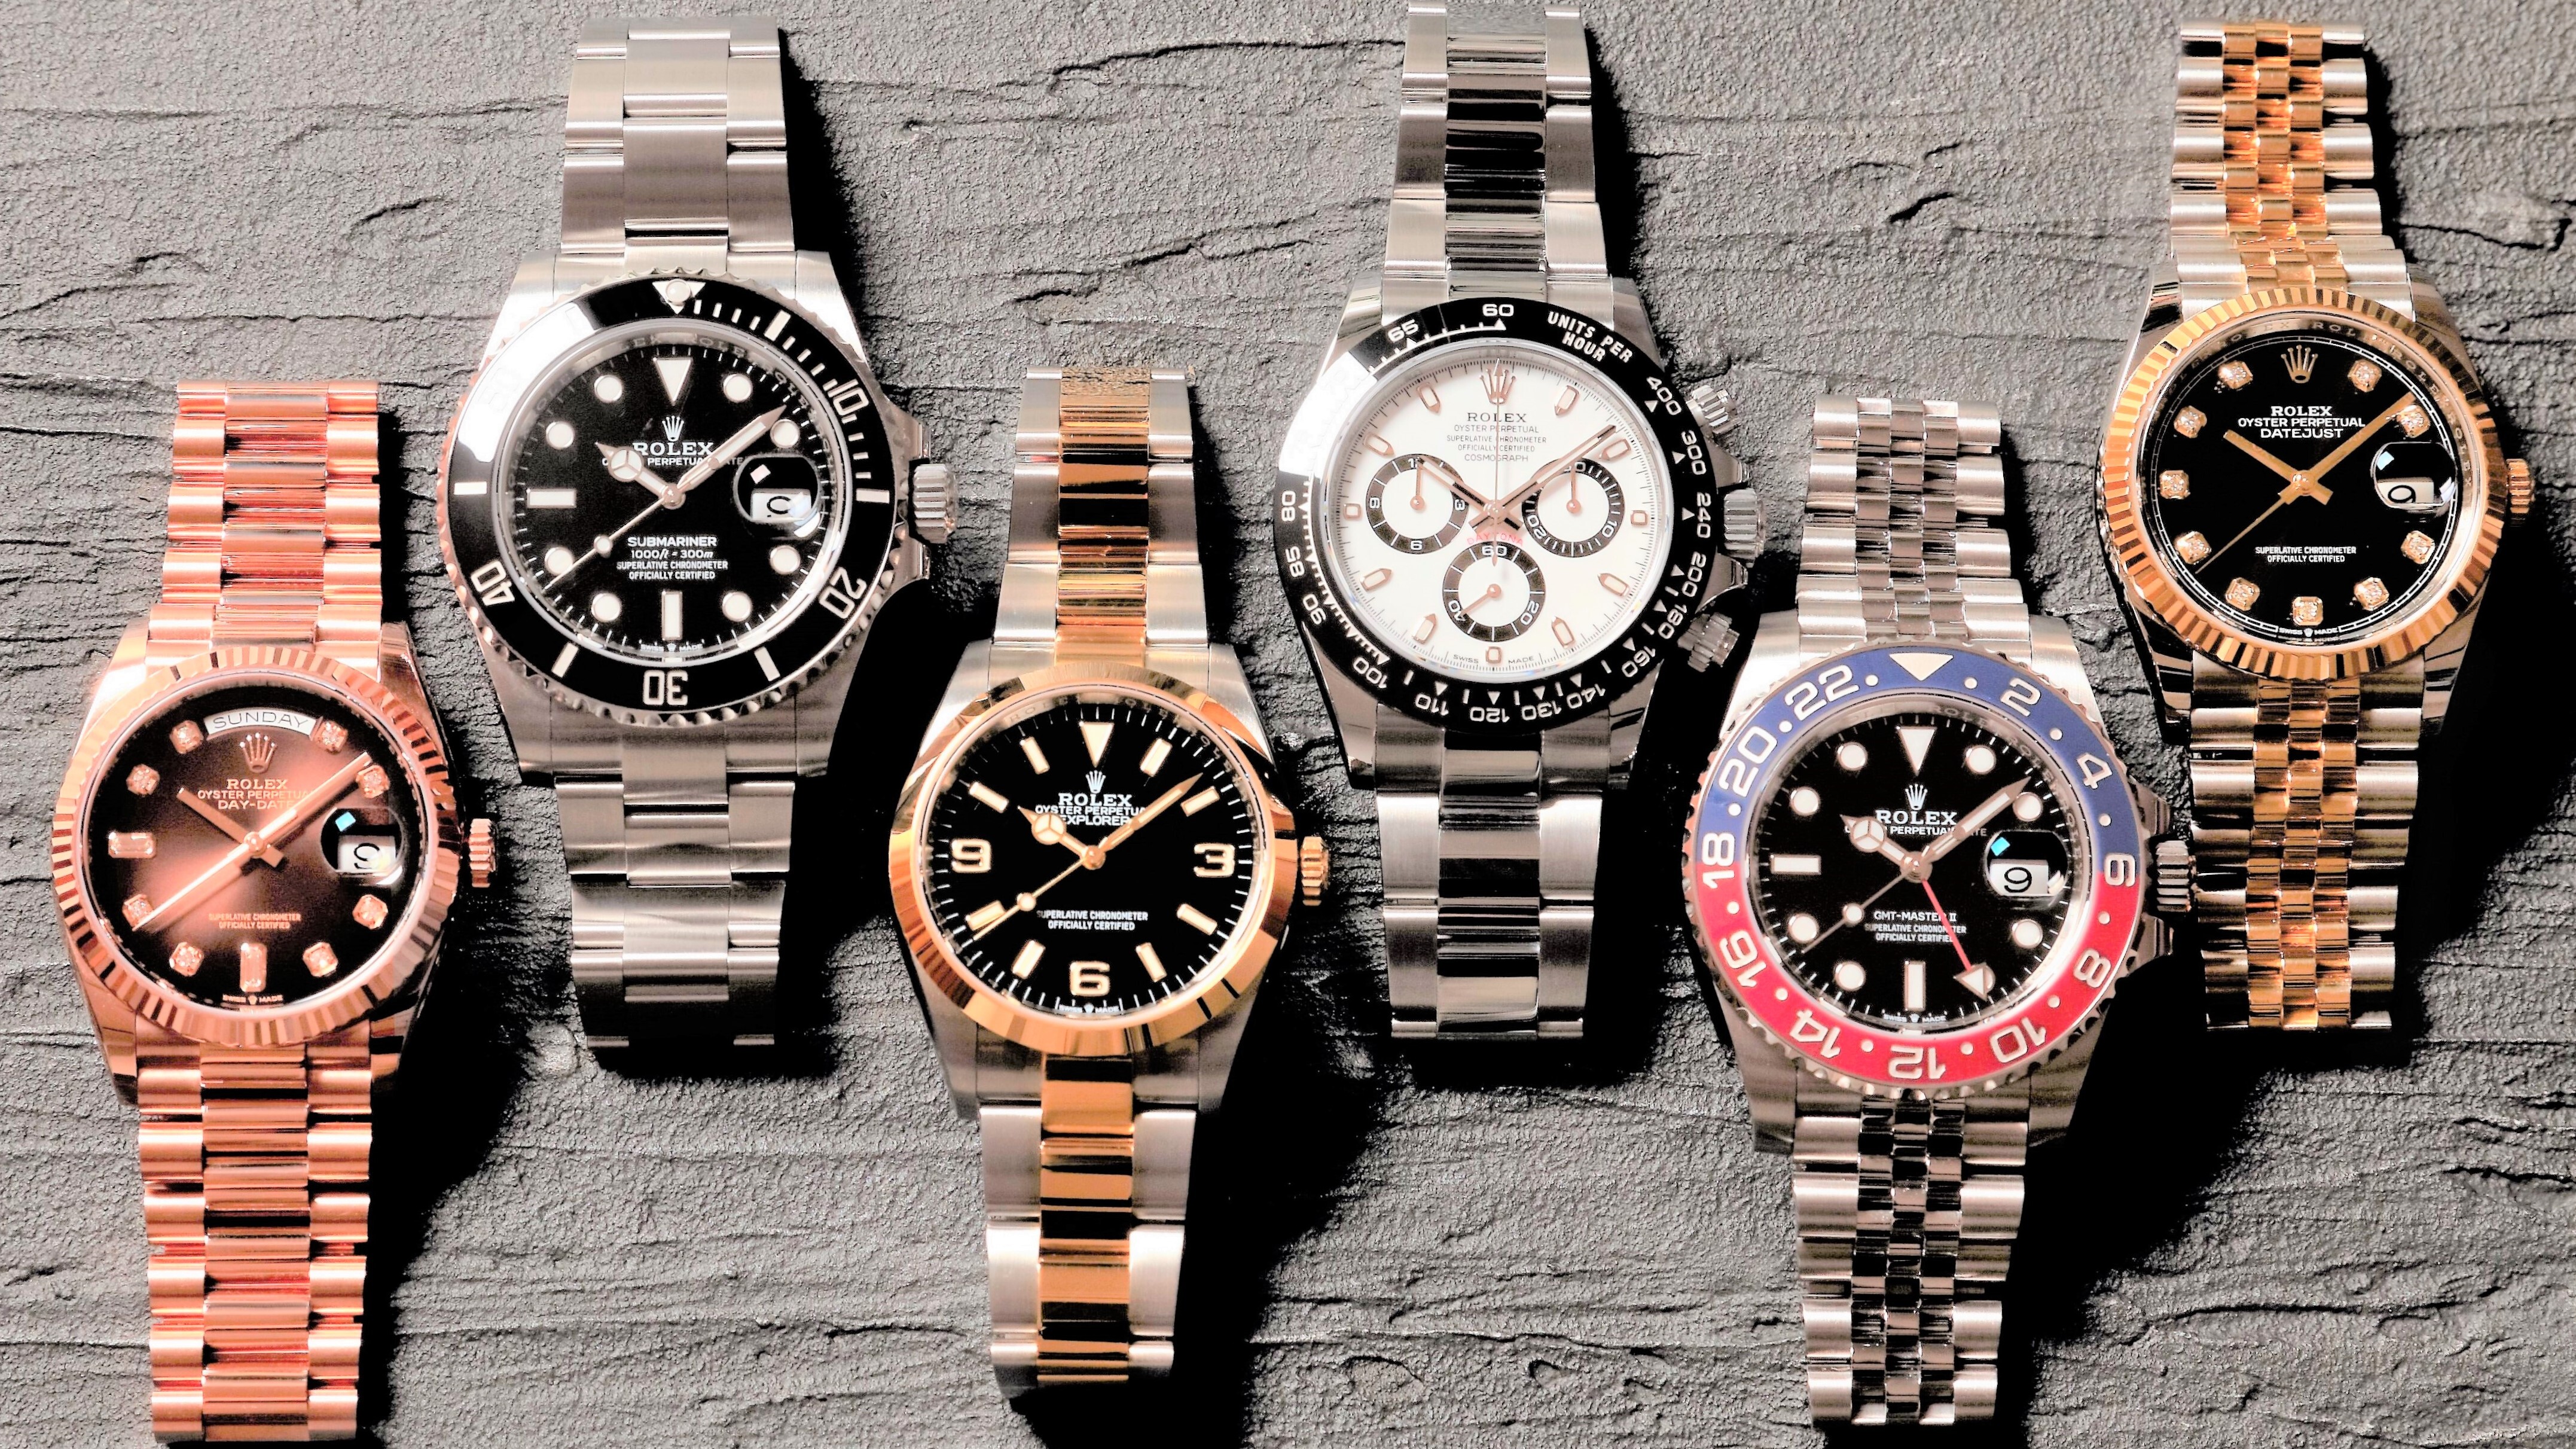 konsonant sandhed bad □ Japan's largest Rolex selection - Quark Ginza 888 Store | Japan Shopping  Now